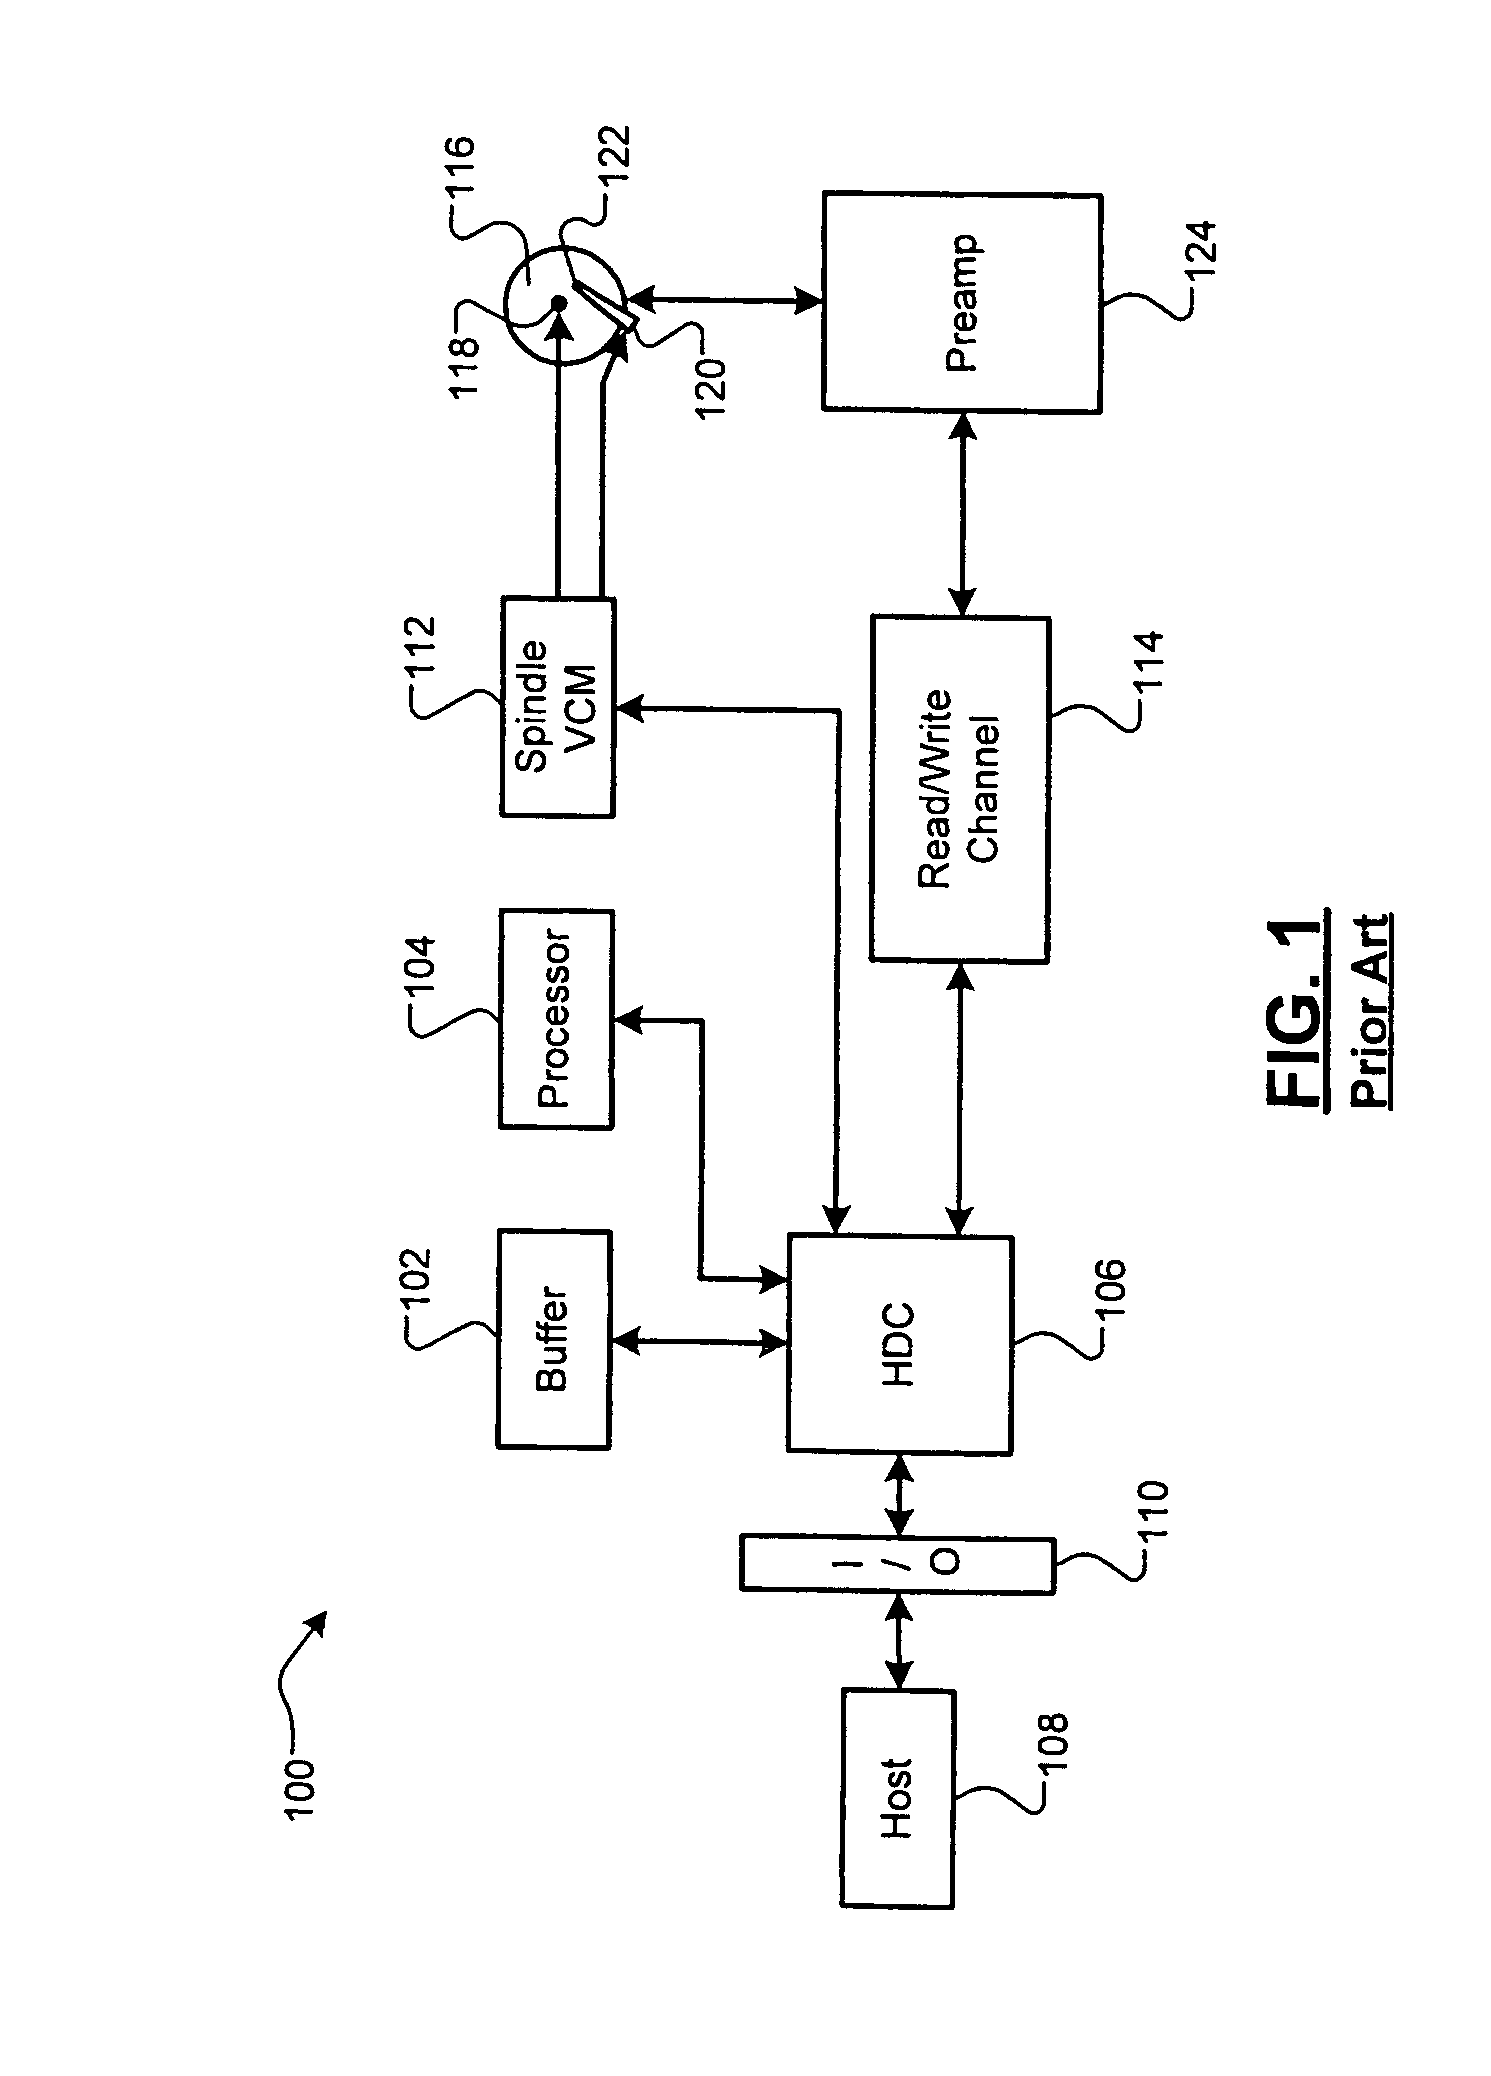 TMR/GMR amplifier with input current compensation